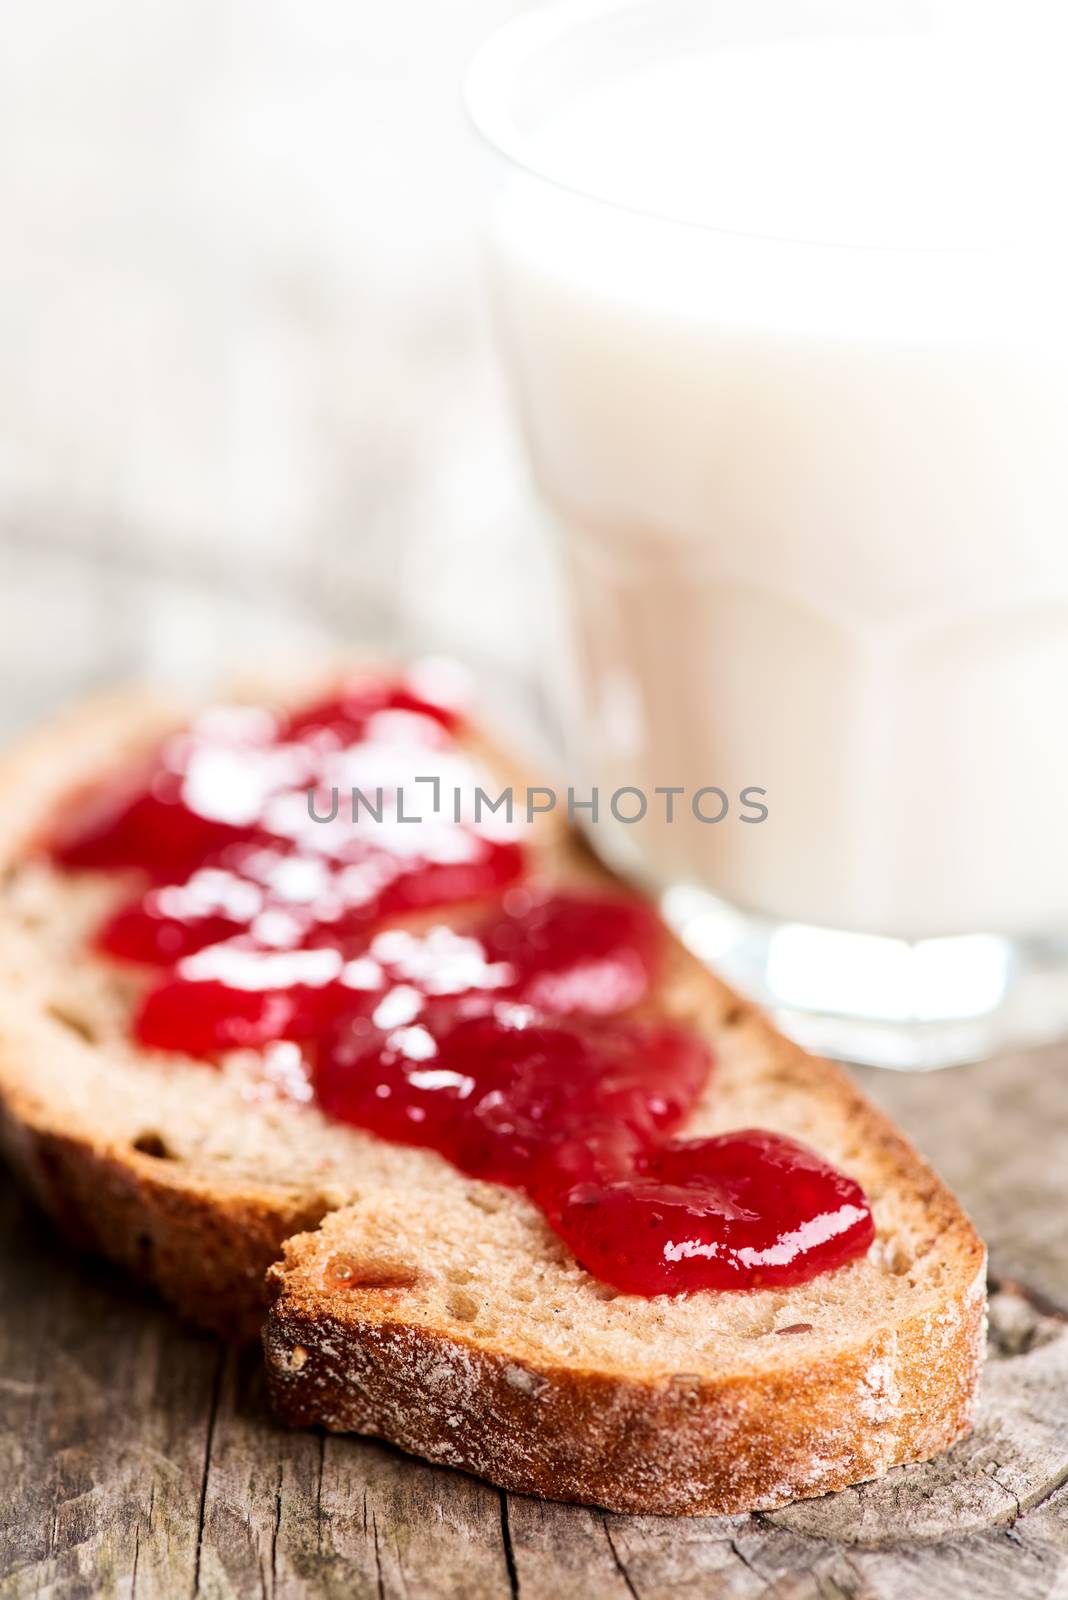 Bread with strawberry spread and glass of milk by Nanisimova